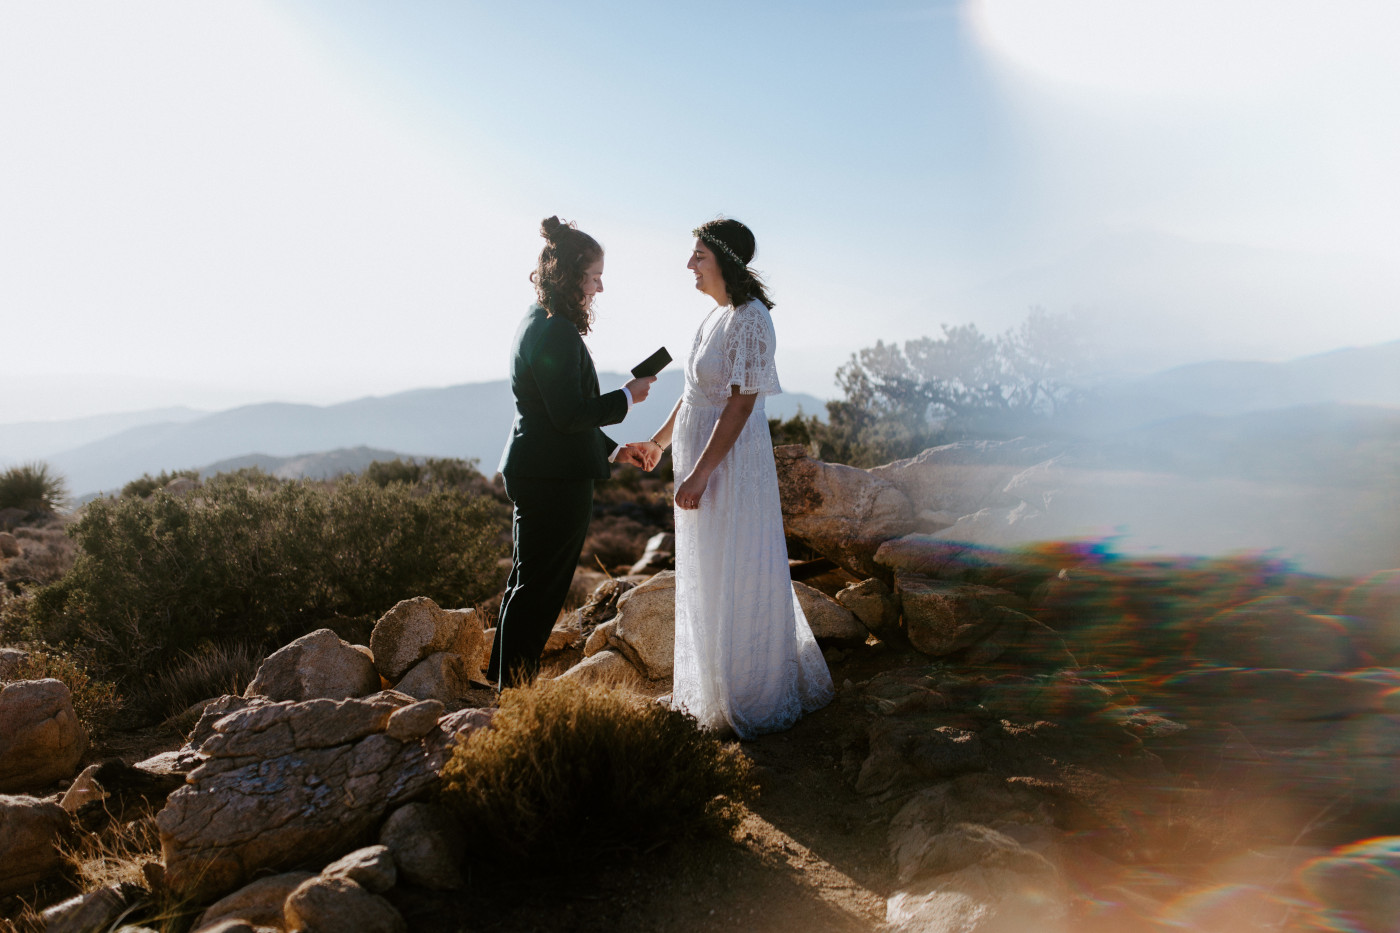 Becca and Madison read their vows to each other during their Joshua Tree National Park elopement.